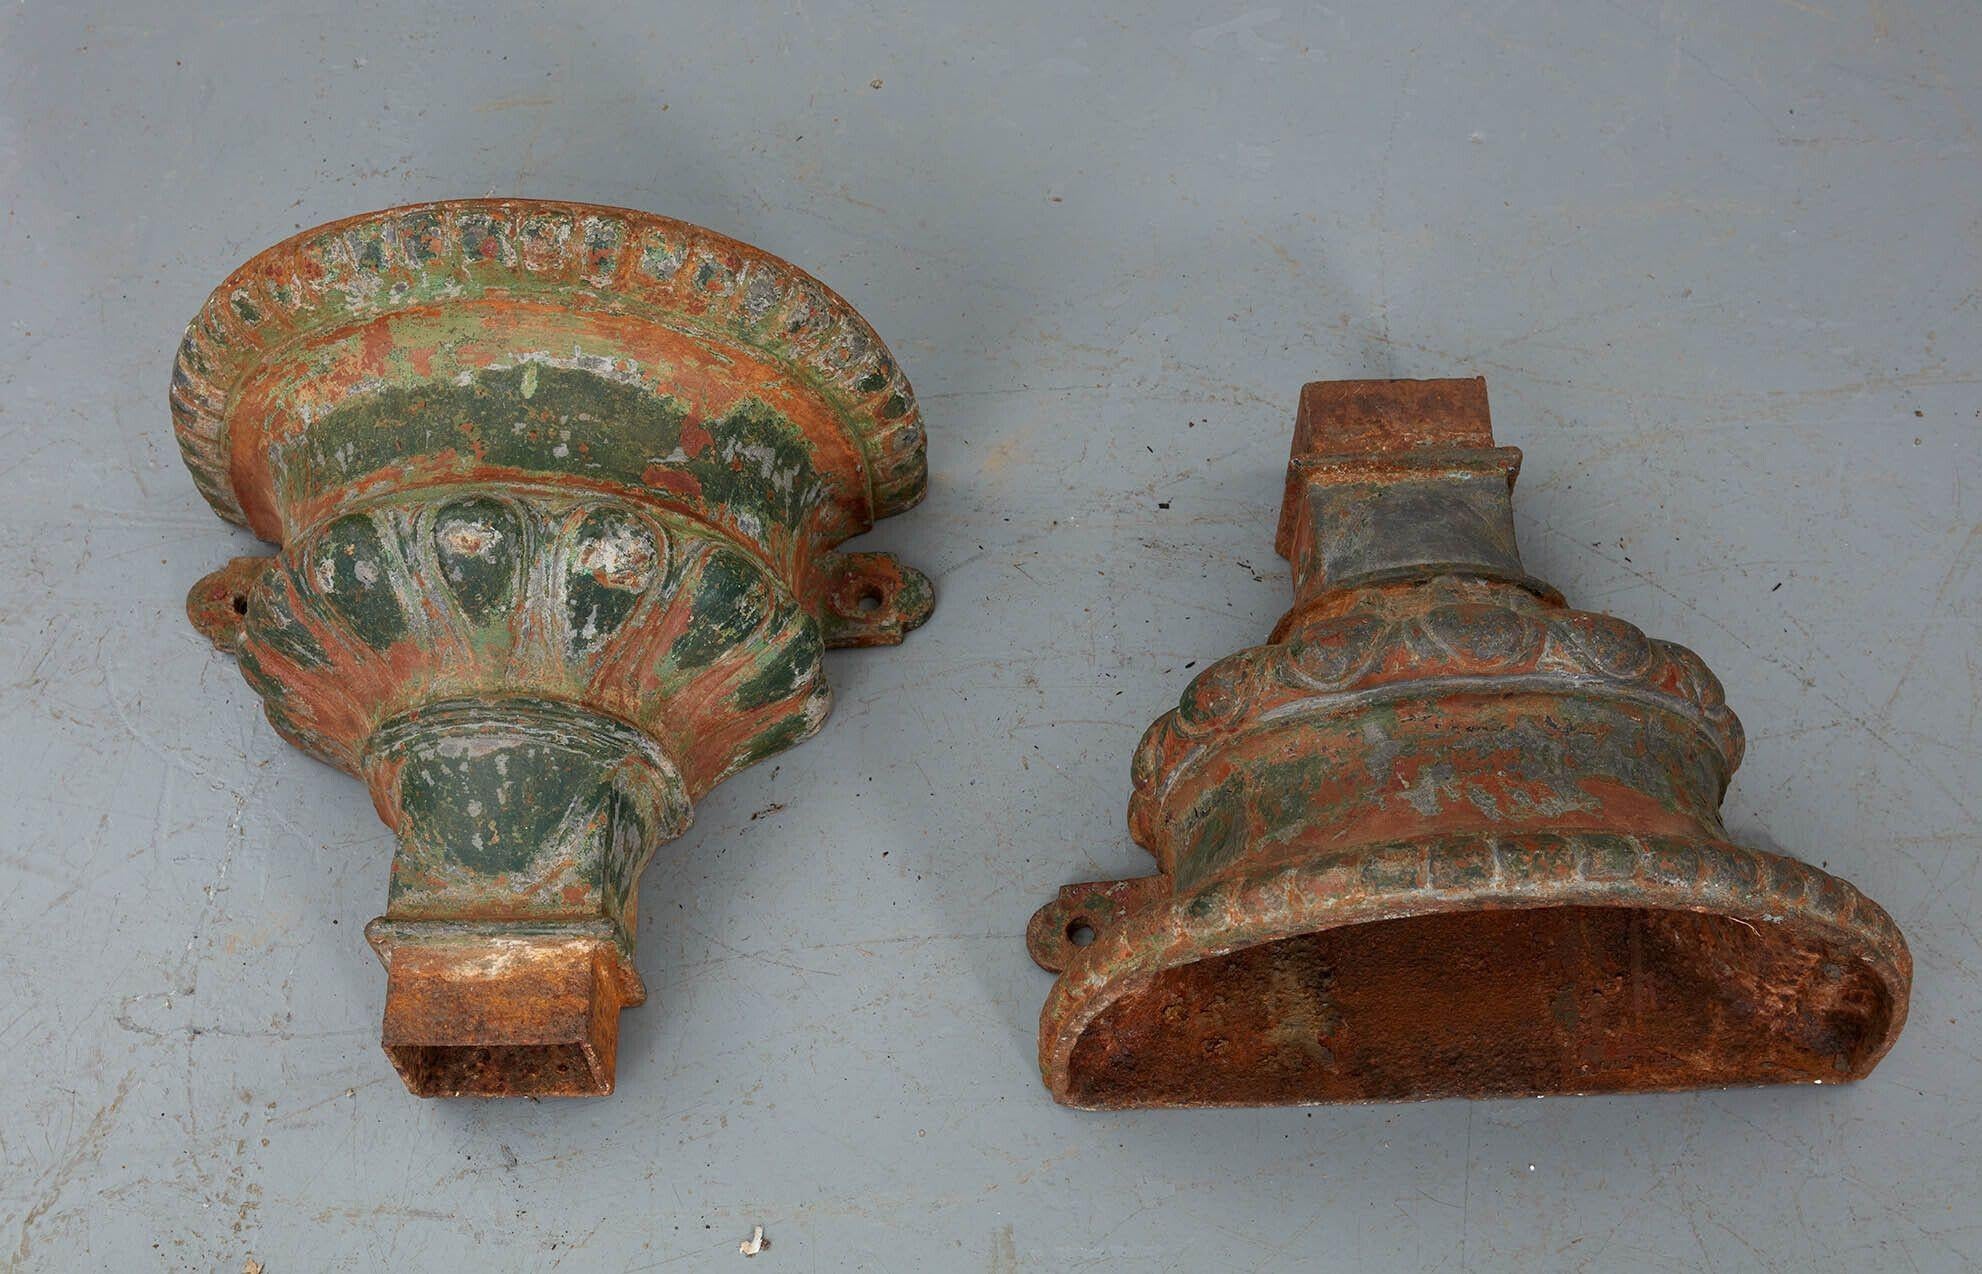 A pair of heavy finely cast iron rain hoppers in the form of classical urns with flared mouths, curved waists and gadrooning to rims and bodies. Attractive weathered surfaces retaining traces of original paint. Now useful as unique wall-mounted